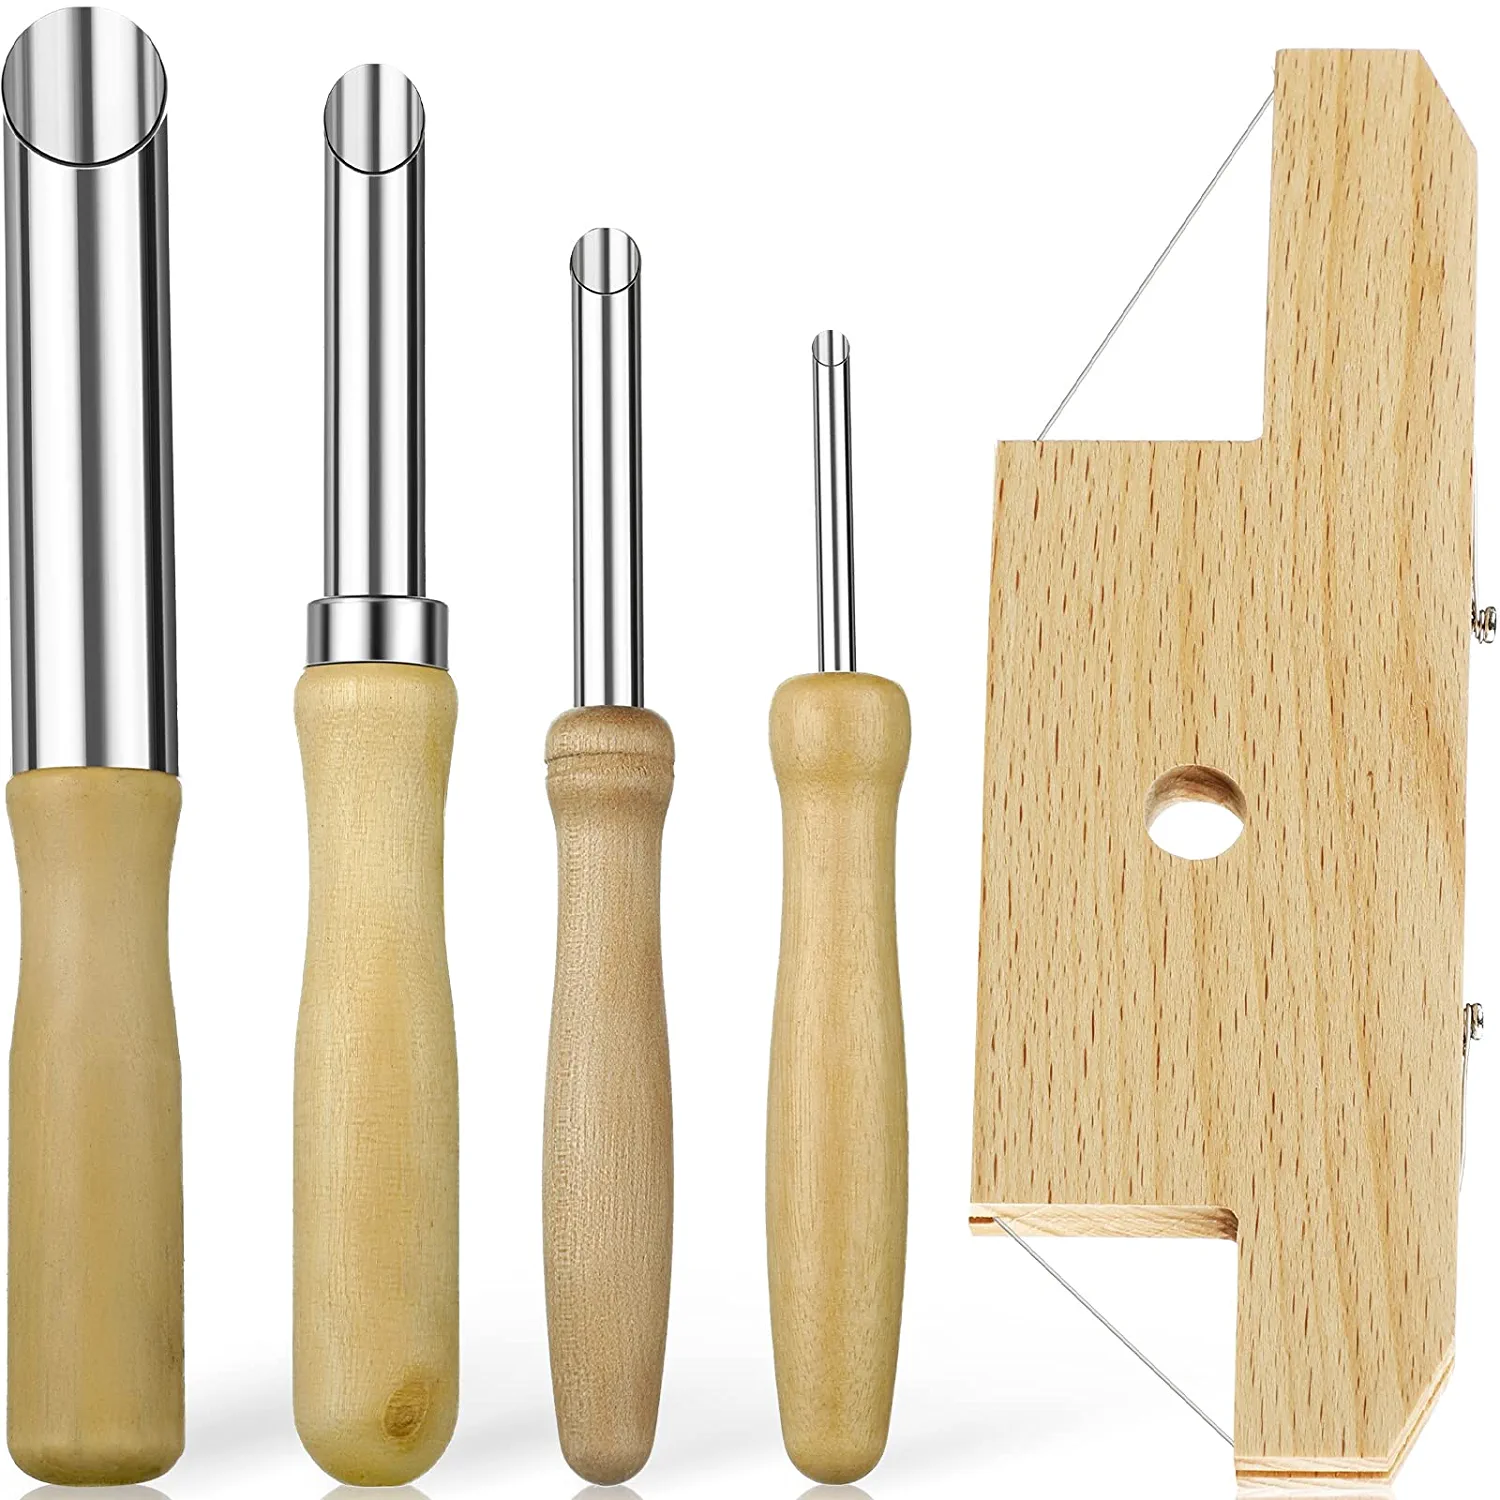 5 Pcs Pottery Clay Tools Set Includes Wood And Wire Bevel Cutter And 4 Pcs Circu - £15.63 GBP